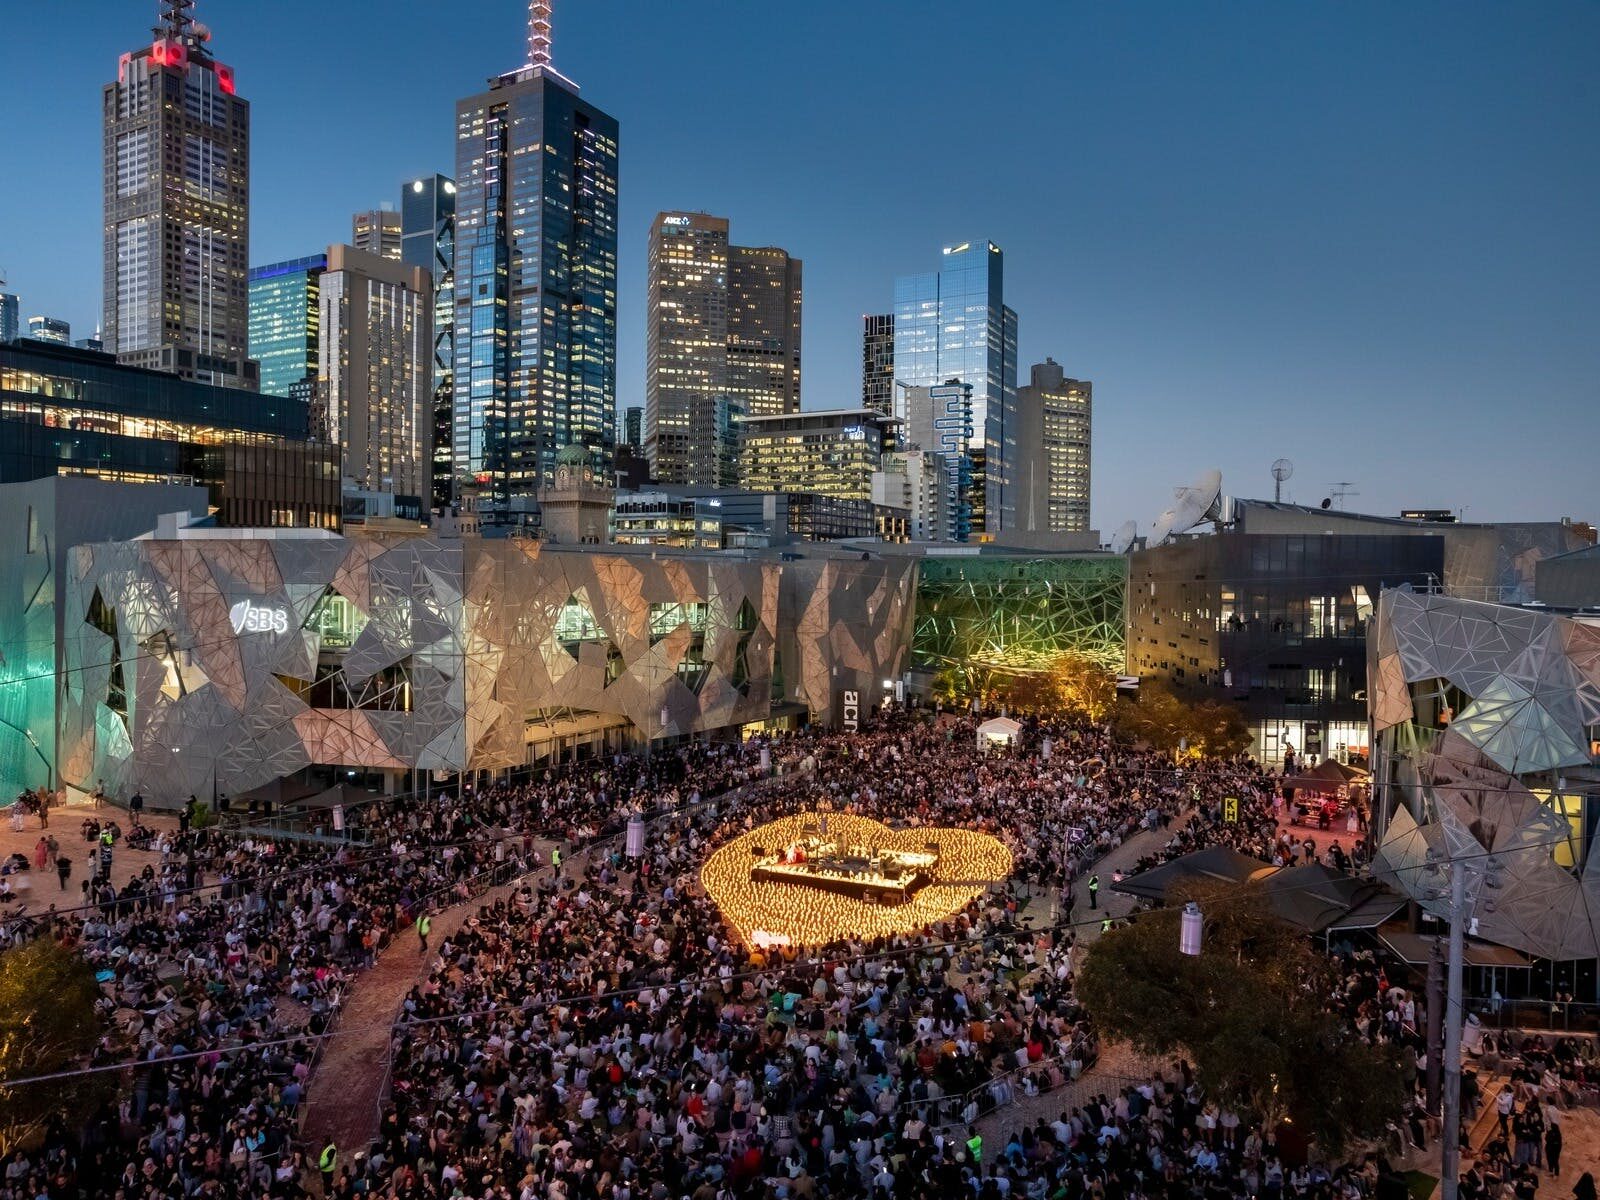 Thousands gather in Fed Square around a stage, surrounded by candles in the shape of a heart.